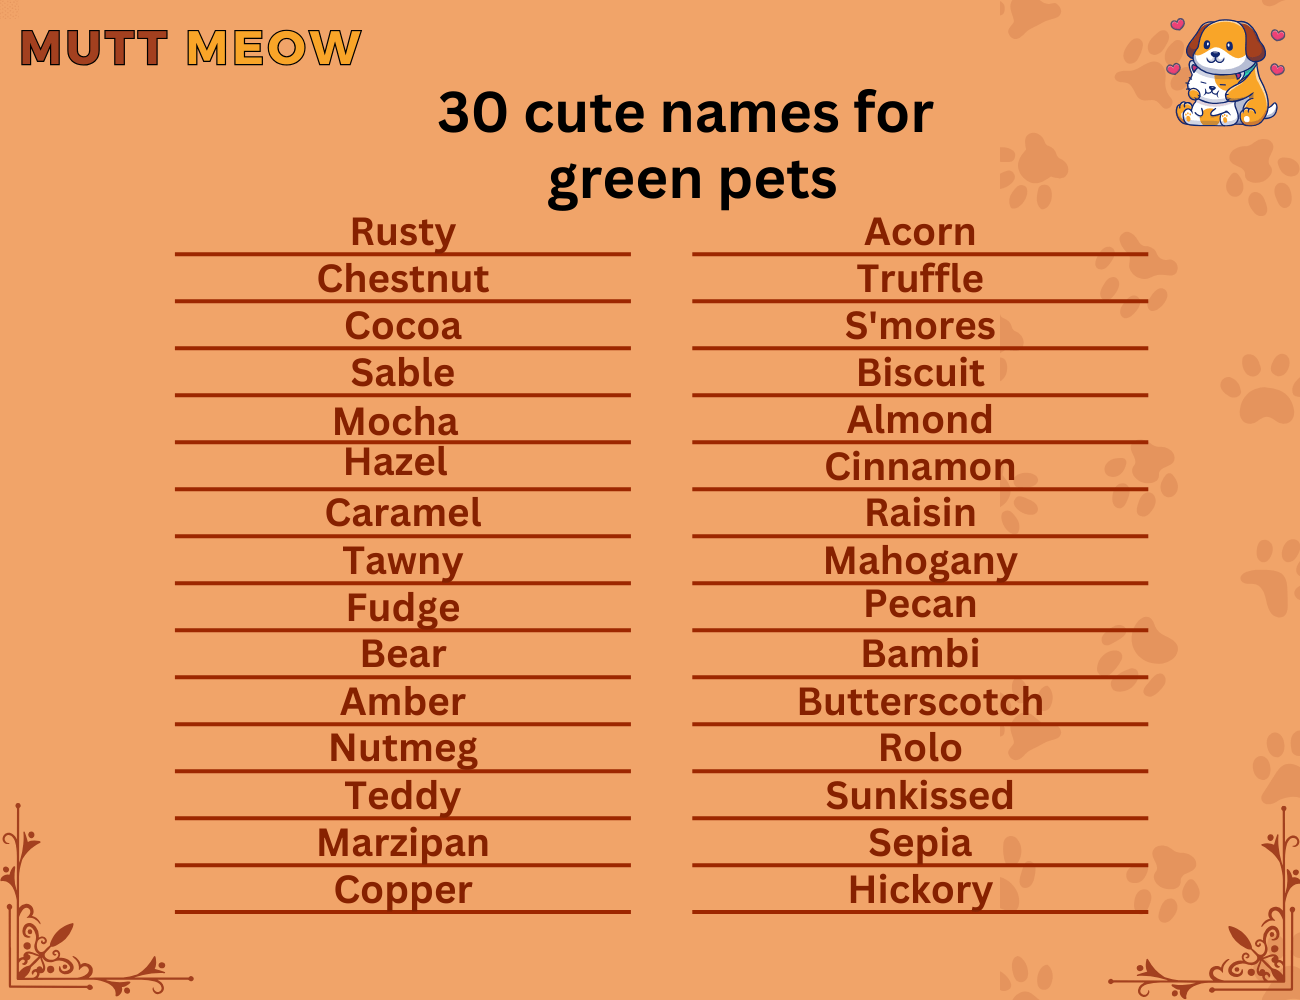 30 cute names for green pets